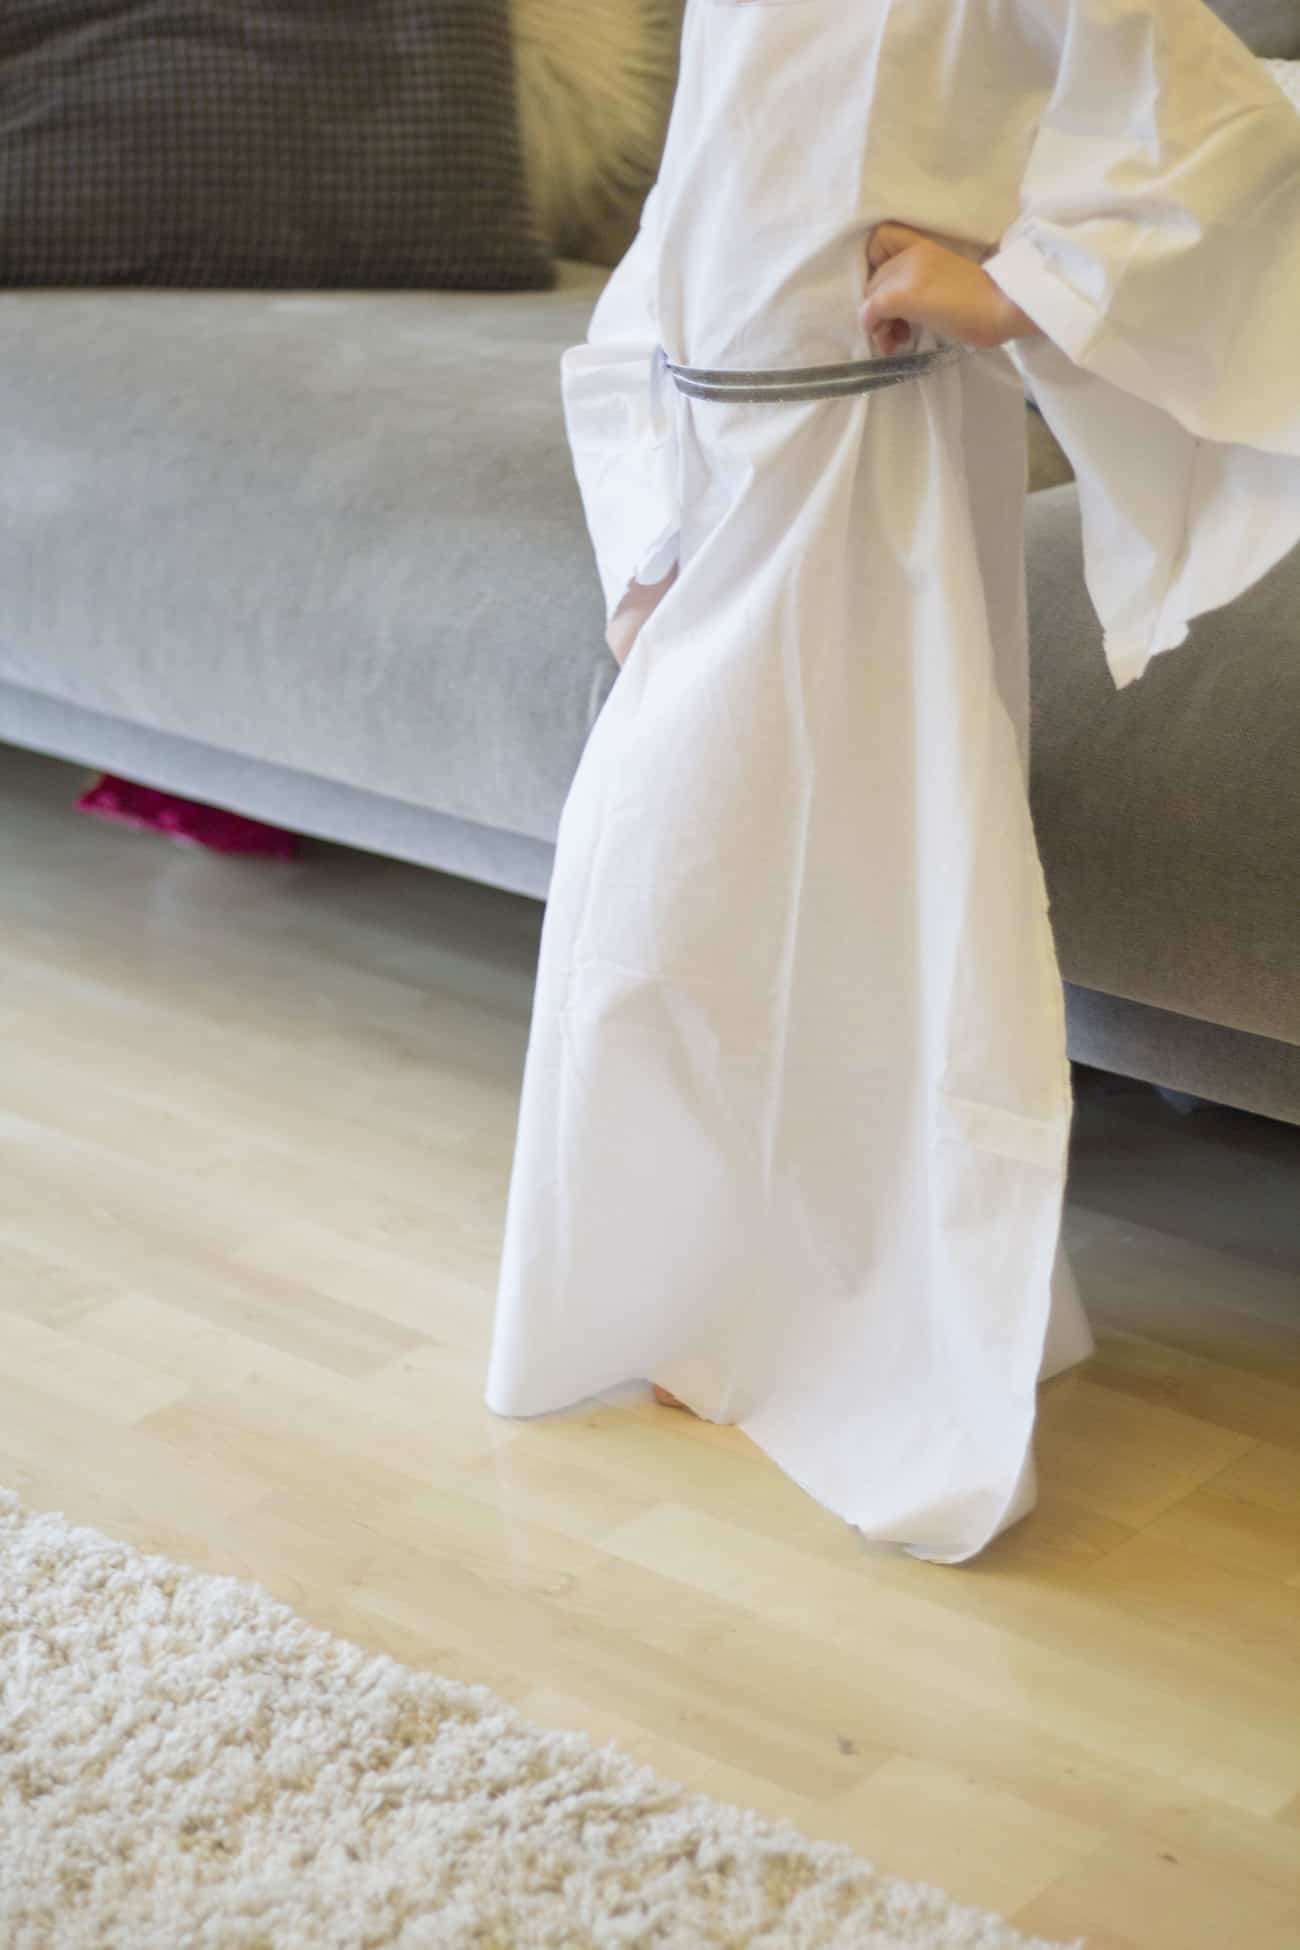 homemade princess leia costume - made out of a white bedsheet and silver ribbon - no sew tutorial.